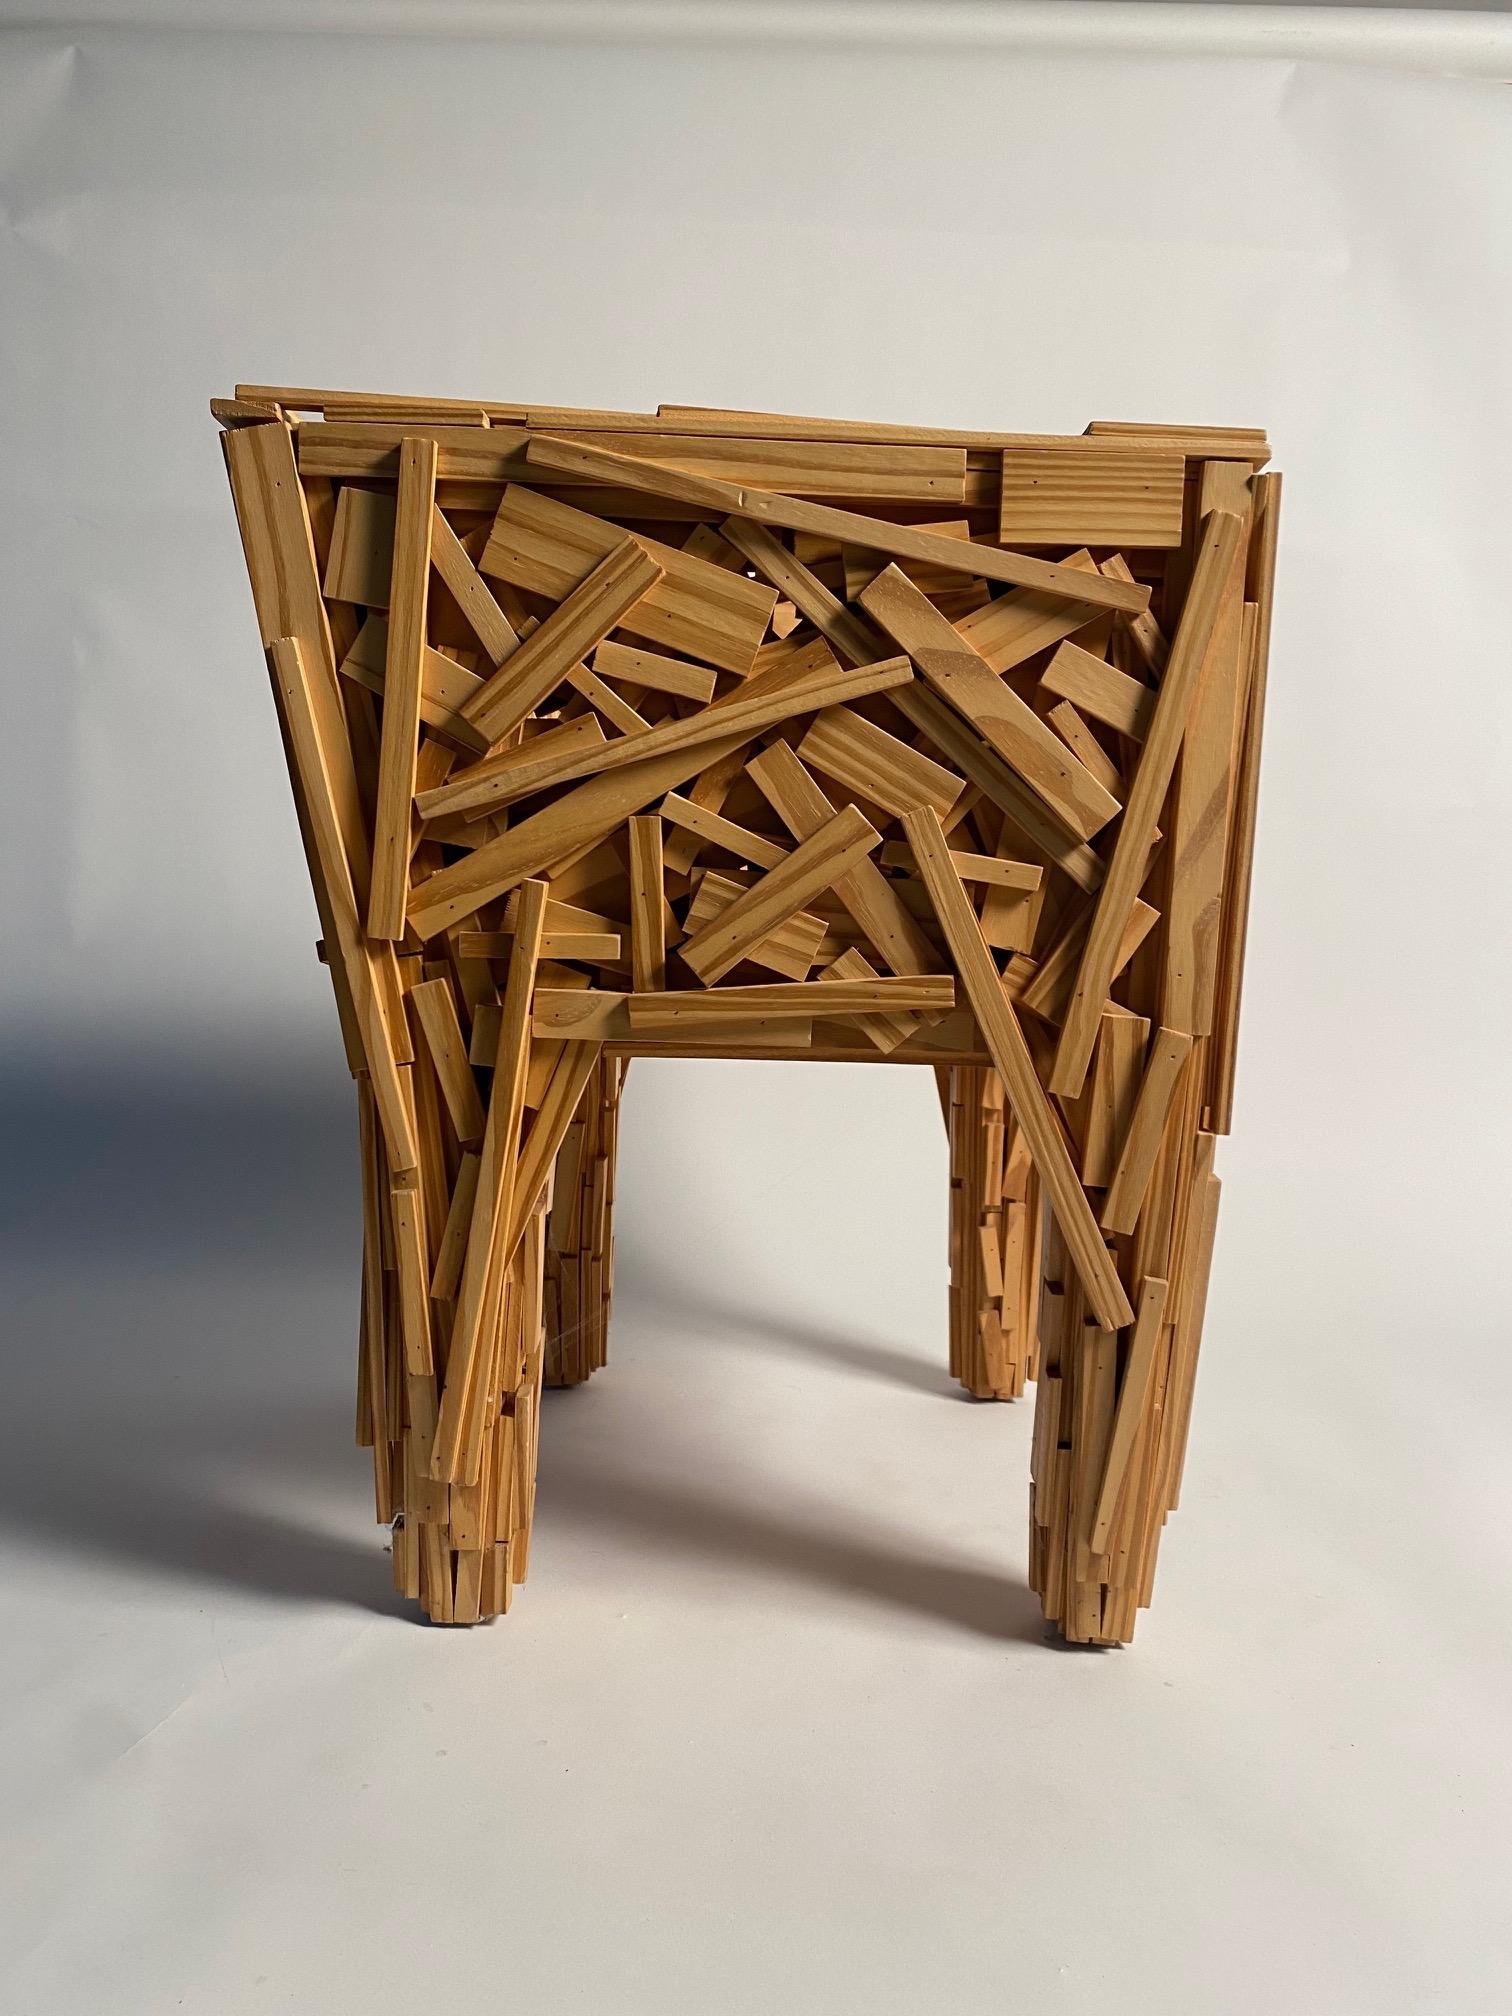 Built with pieces of natural Brazilian Pinus wood, fixed by hand in a deliberately random, the Favela armchair was designed by the now legendary Campana brothers (Humberto and Fernando) for the Italian firm Edra and constitutes one of their most